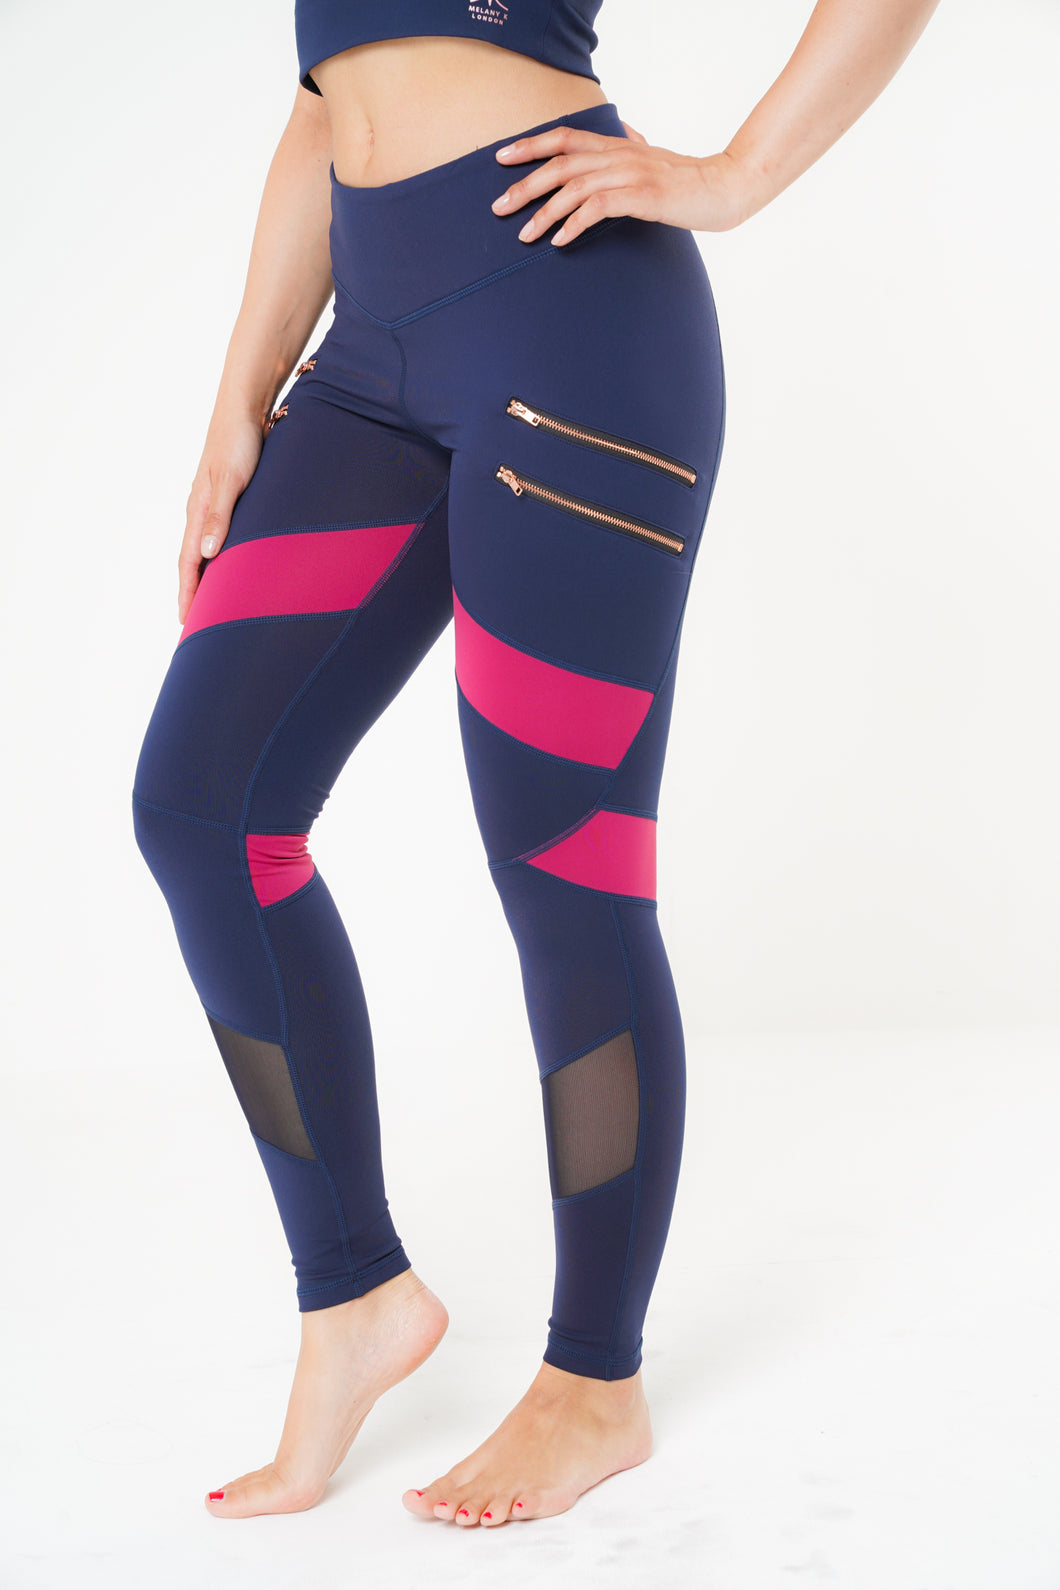 MLK Full Length Navy and Pink Leggings with  Double zip detail and mesh on front calf